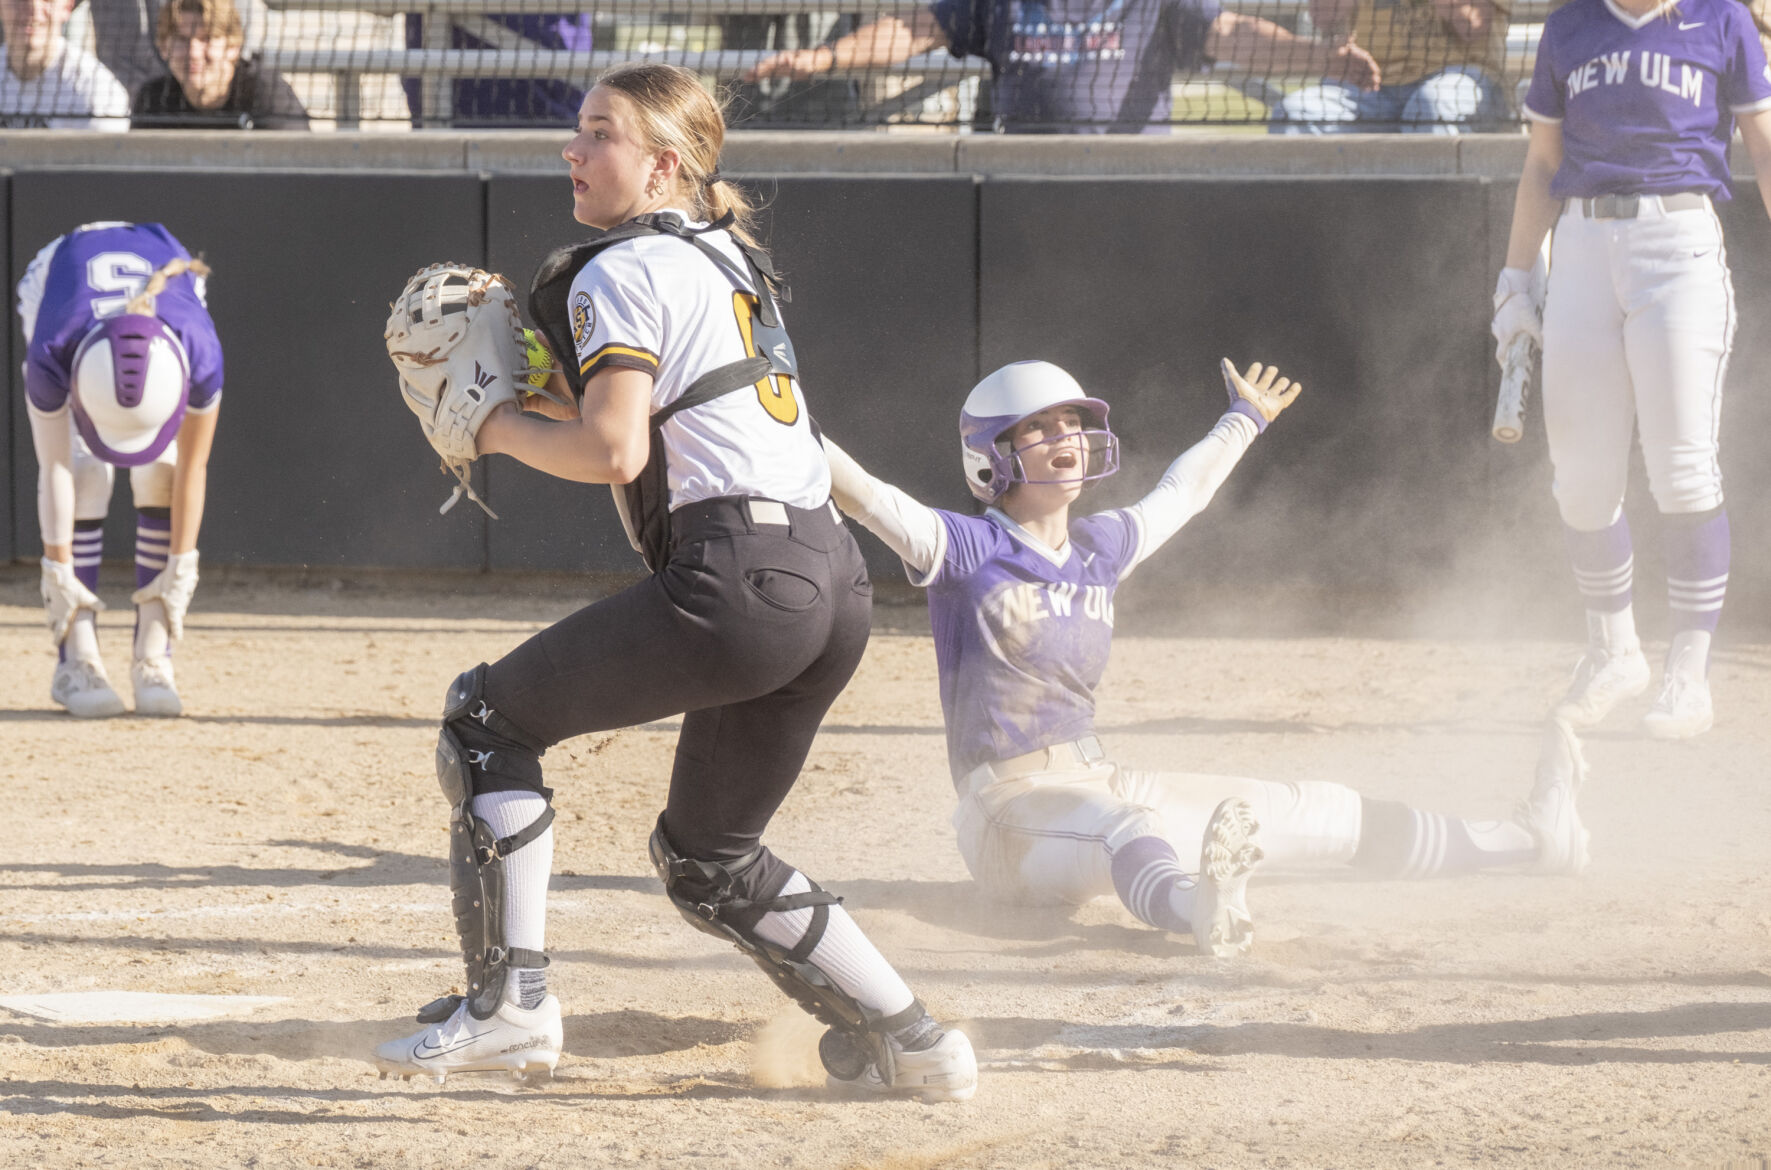 New Ulm’s Schmiesing’s decisive homer leads to victory over No. 1 ranked East